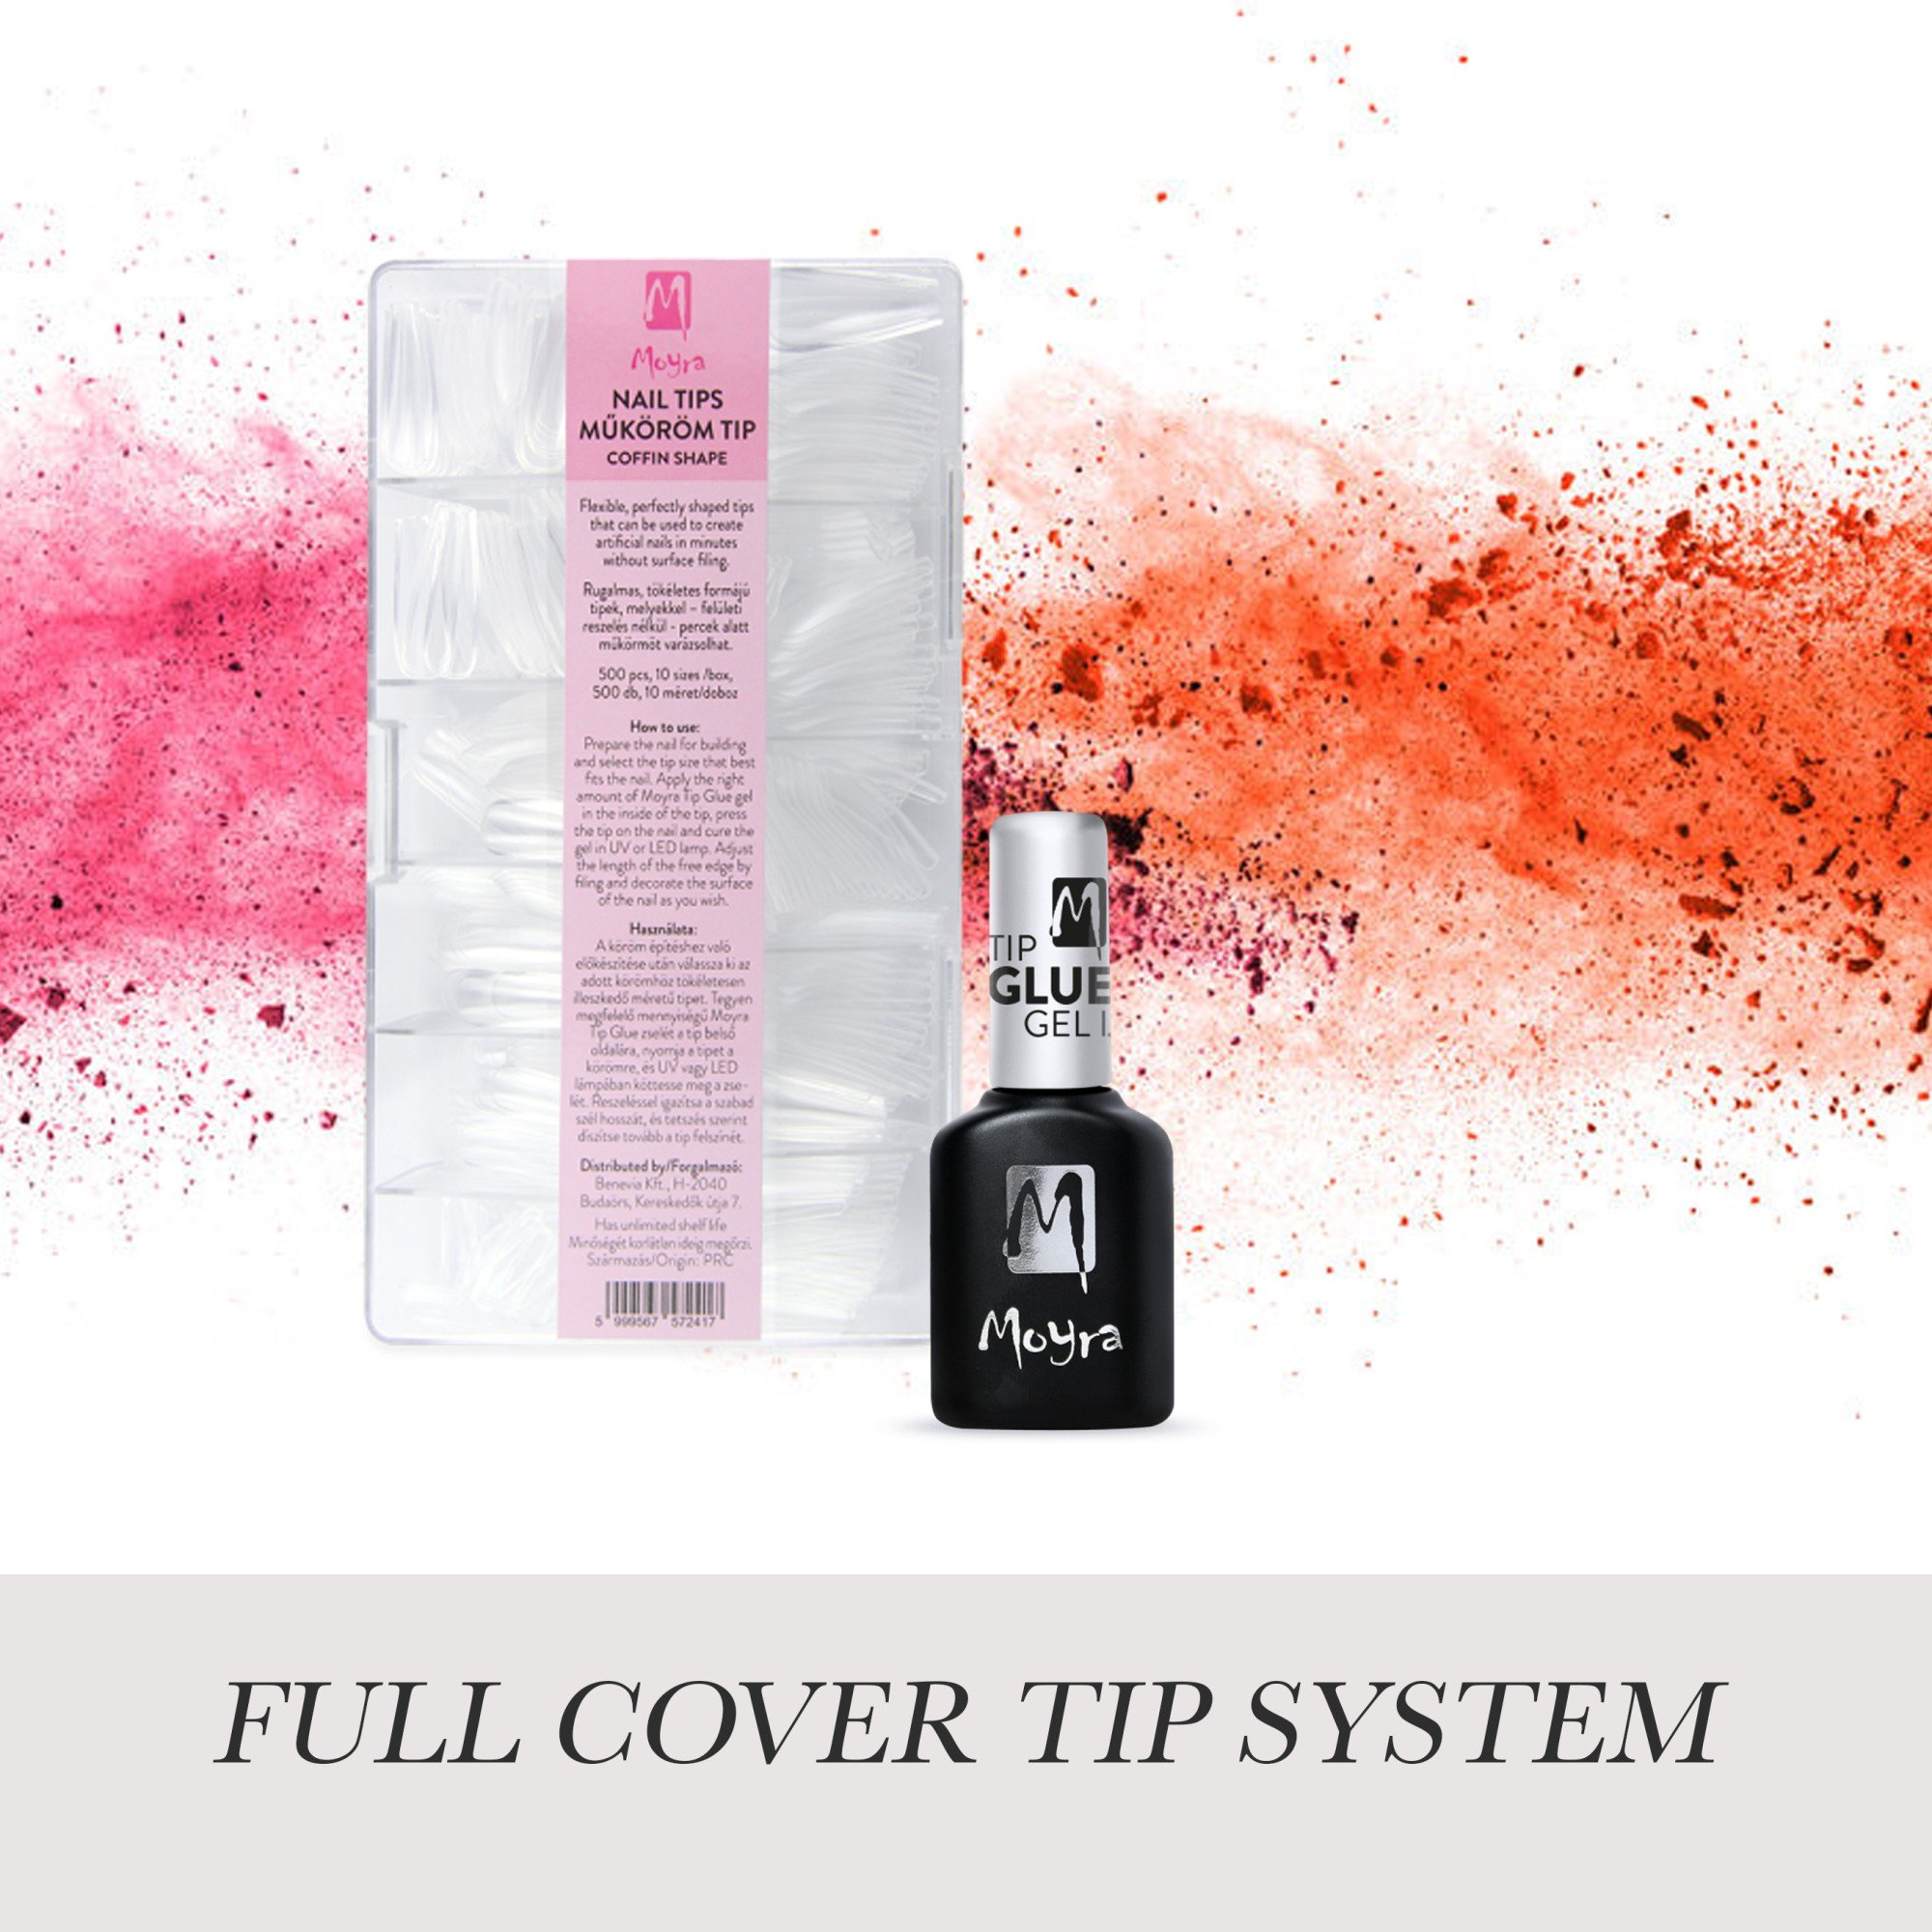 Full Cover Tip System - Briis AS